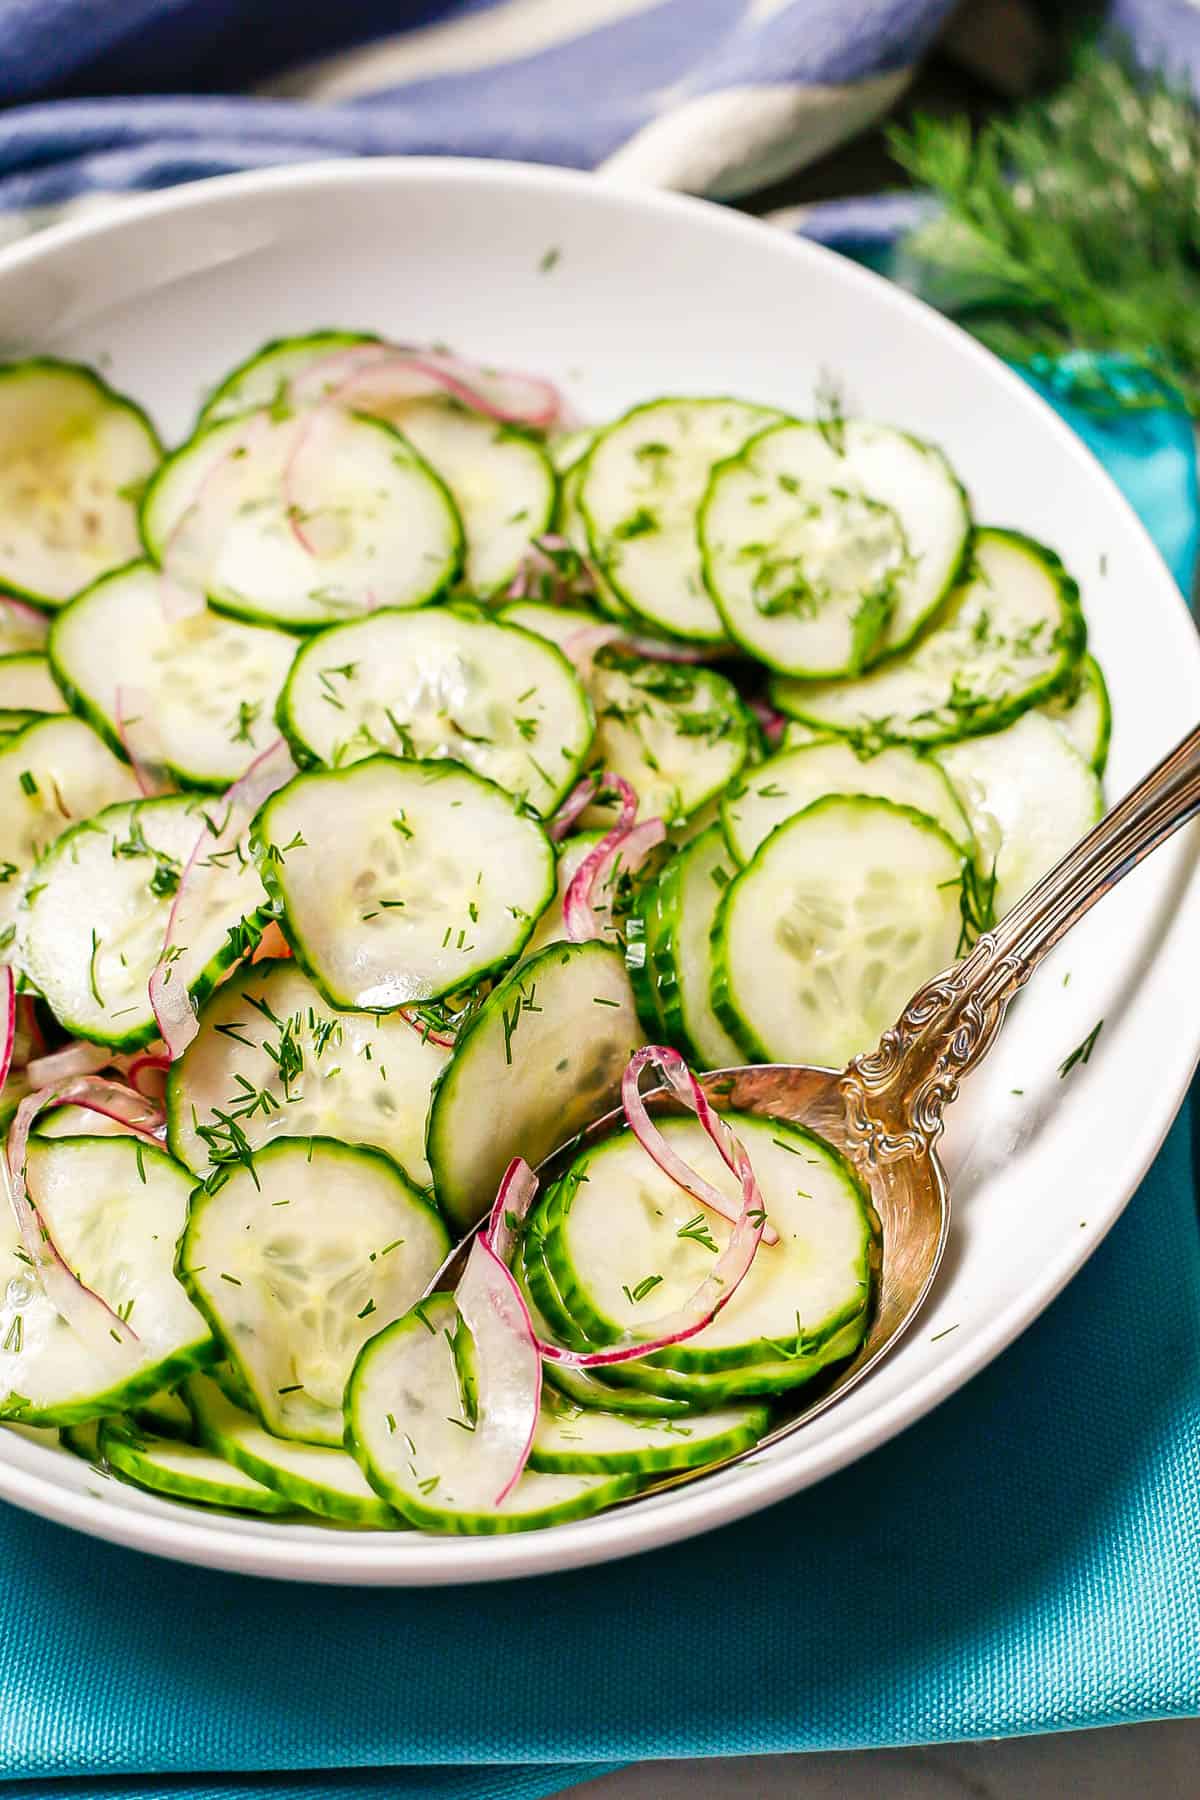 A serving spoon resting in a white bowl with sliced cucumbers and red onions topped with fresh dill.